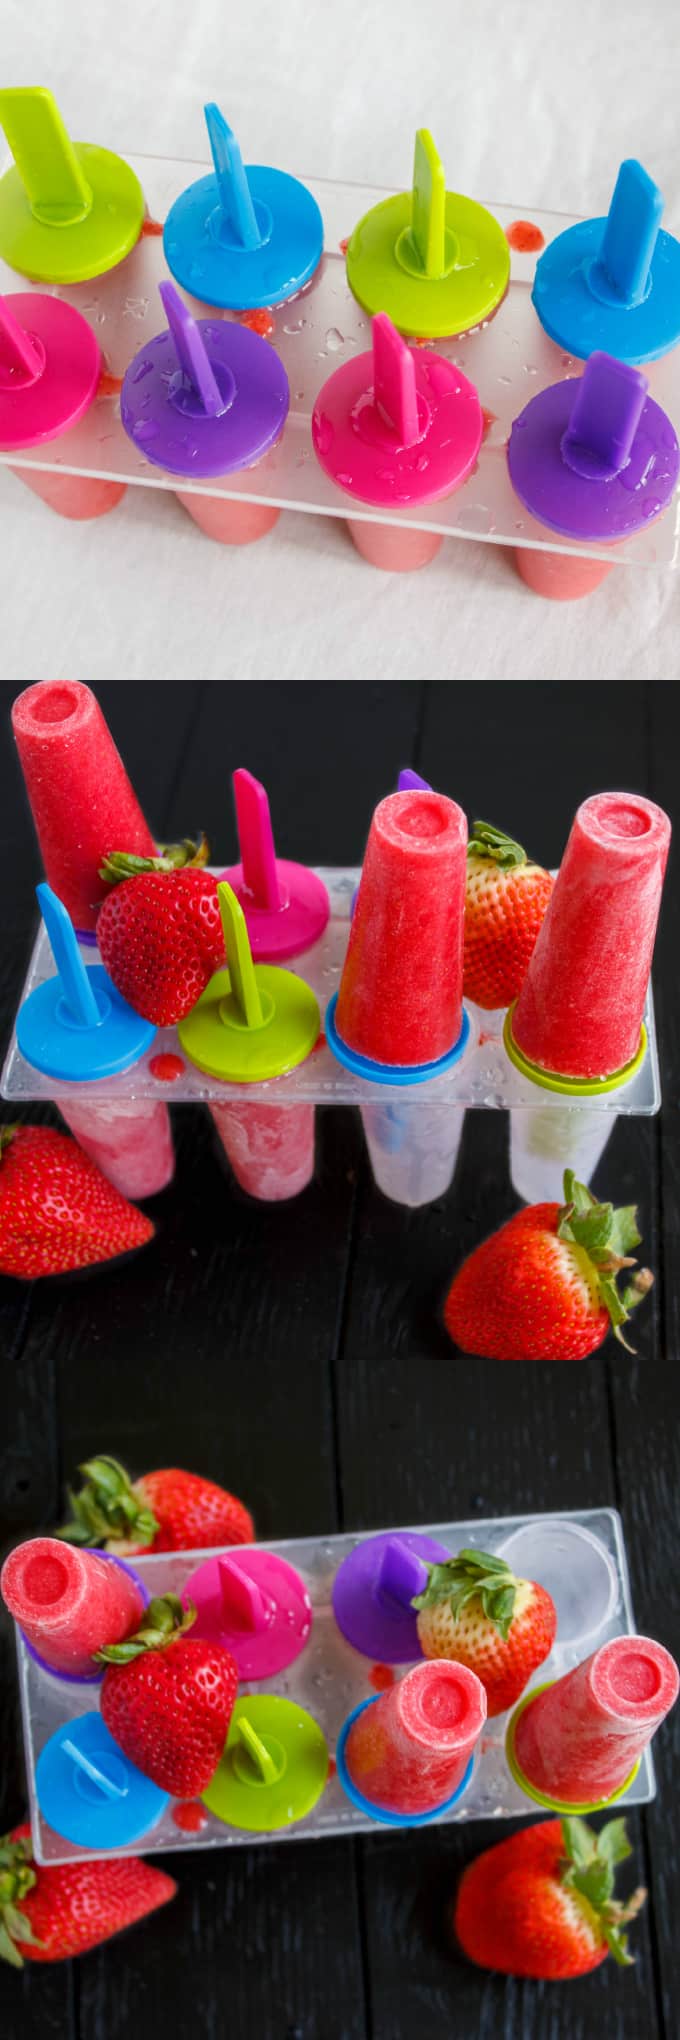 Strawberry Sorbet Popsicles in plastic form with ripe strawberries on white and black table